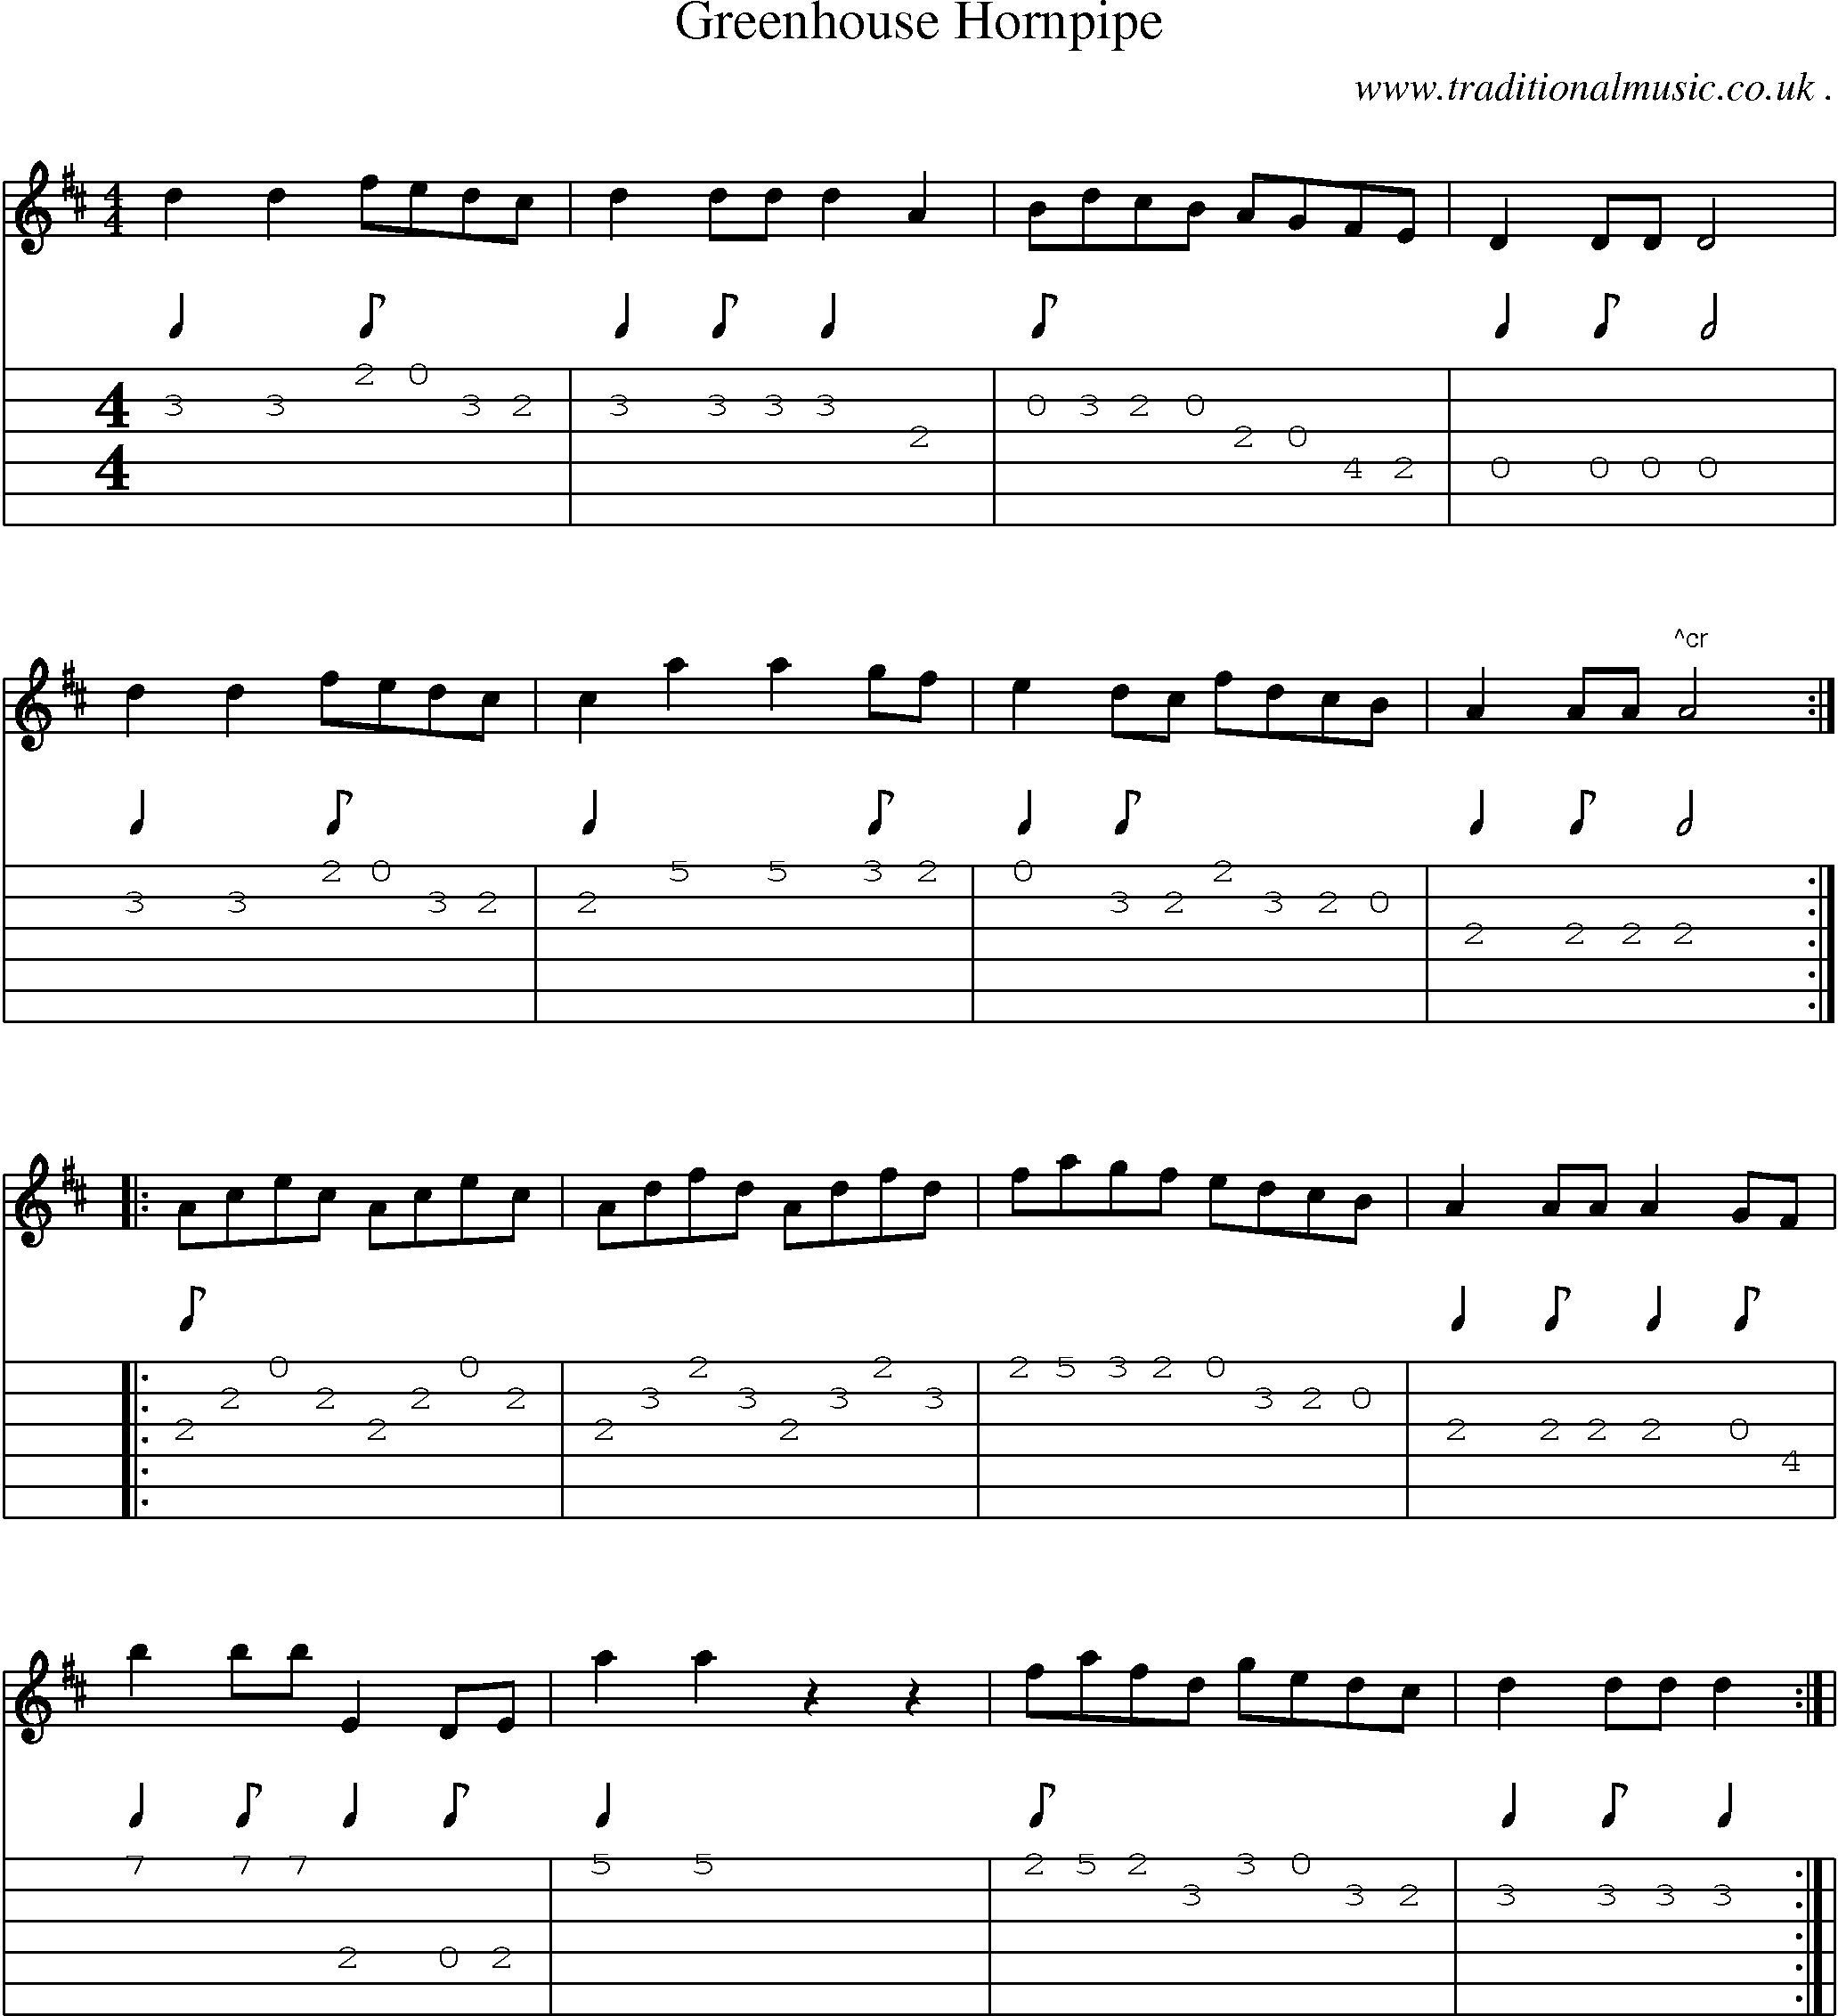 Sheet-Music and Guitar Tabs for Greenhouse Hornpipe